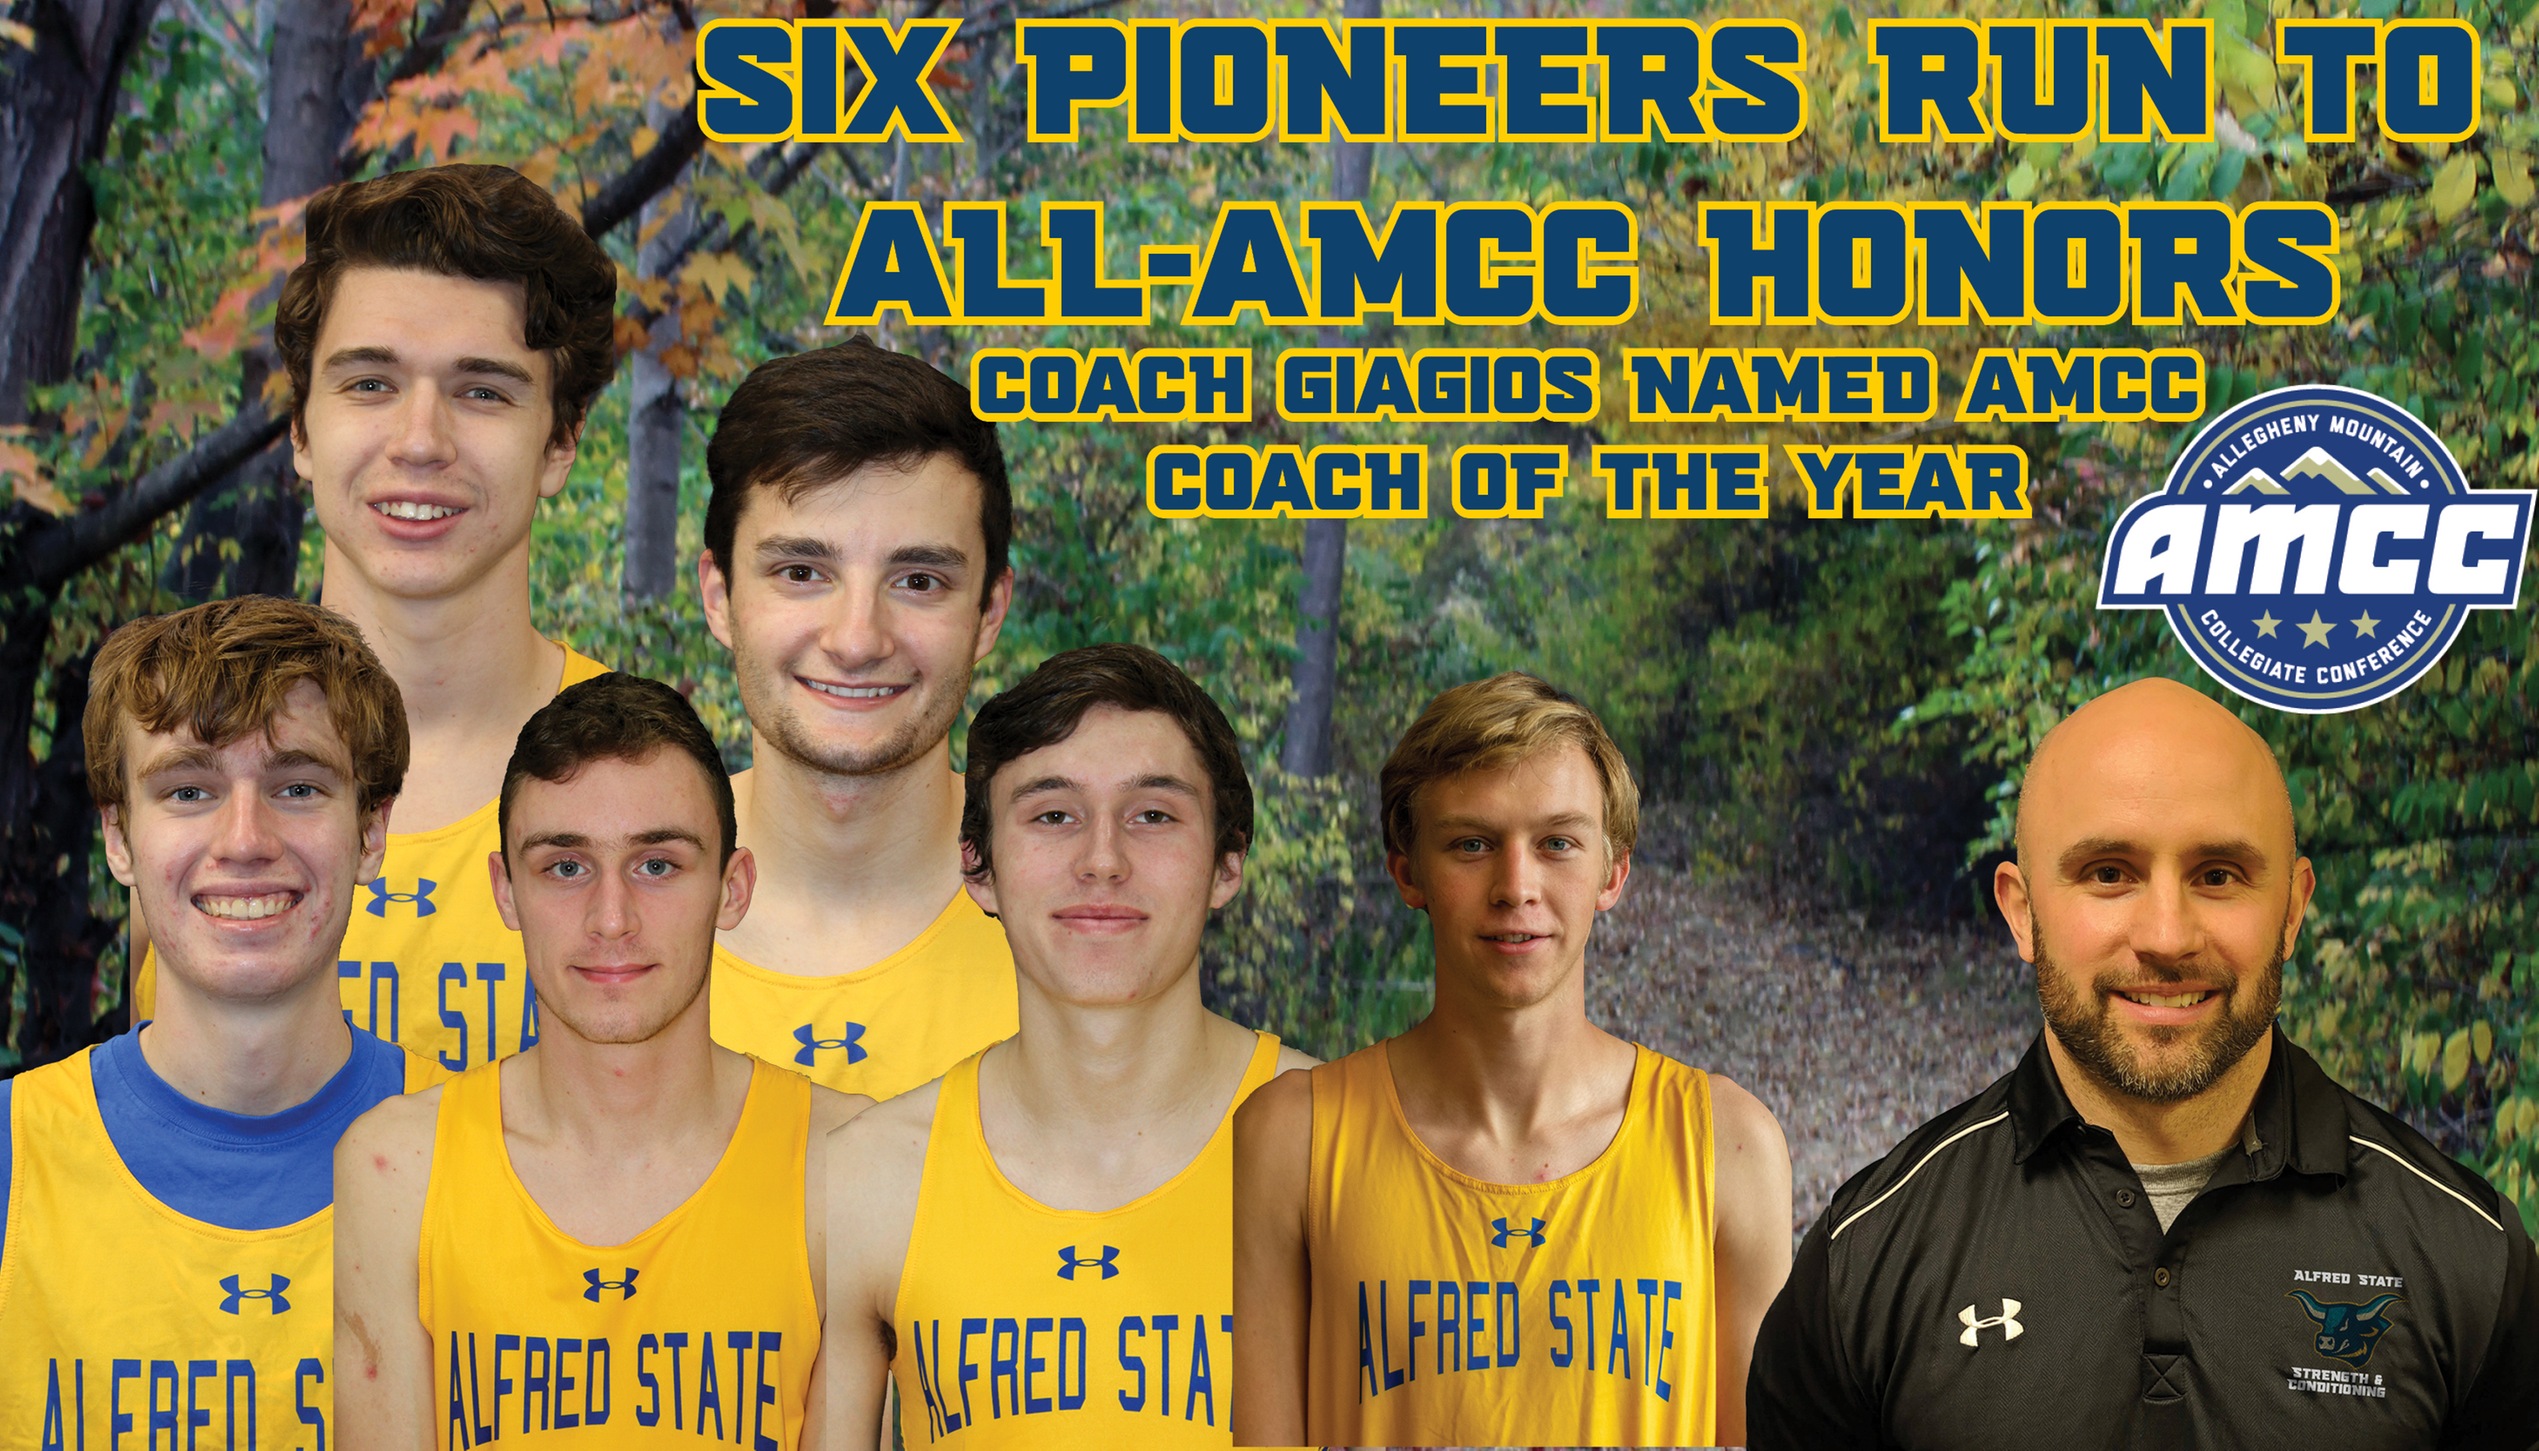 Six ASC cross country runners (pictured) have been named All-AMCC along with Coach Giagios being named AMCC Coach of the Year.